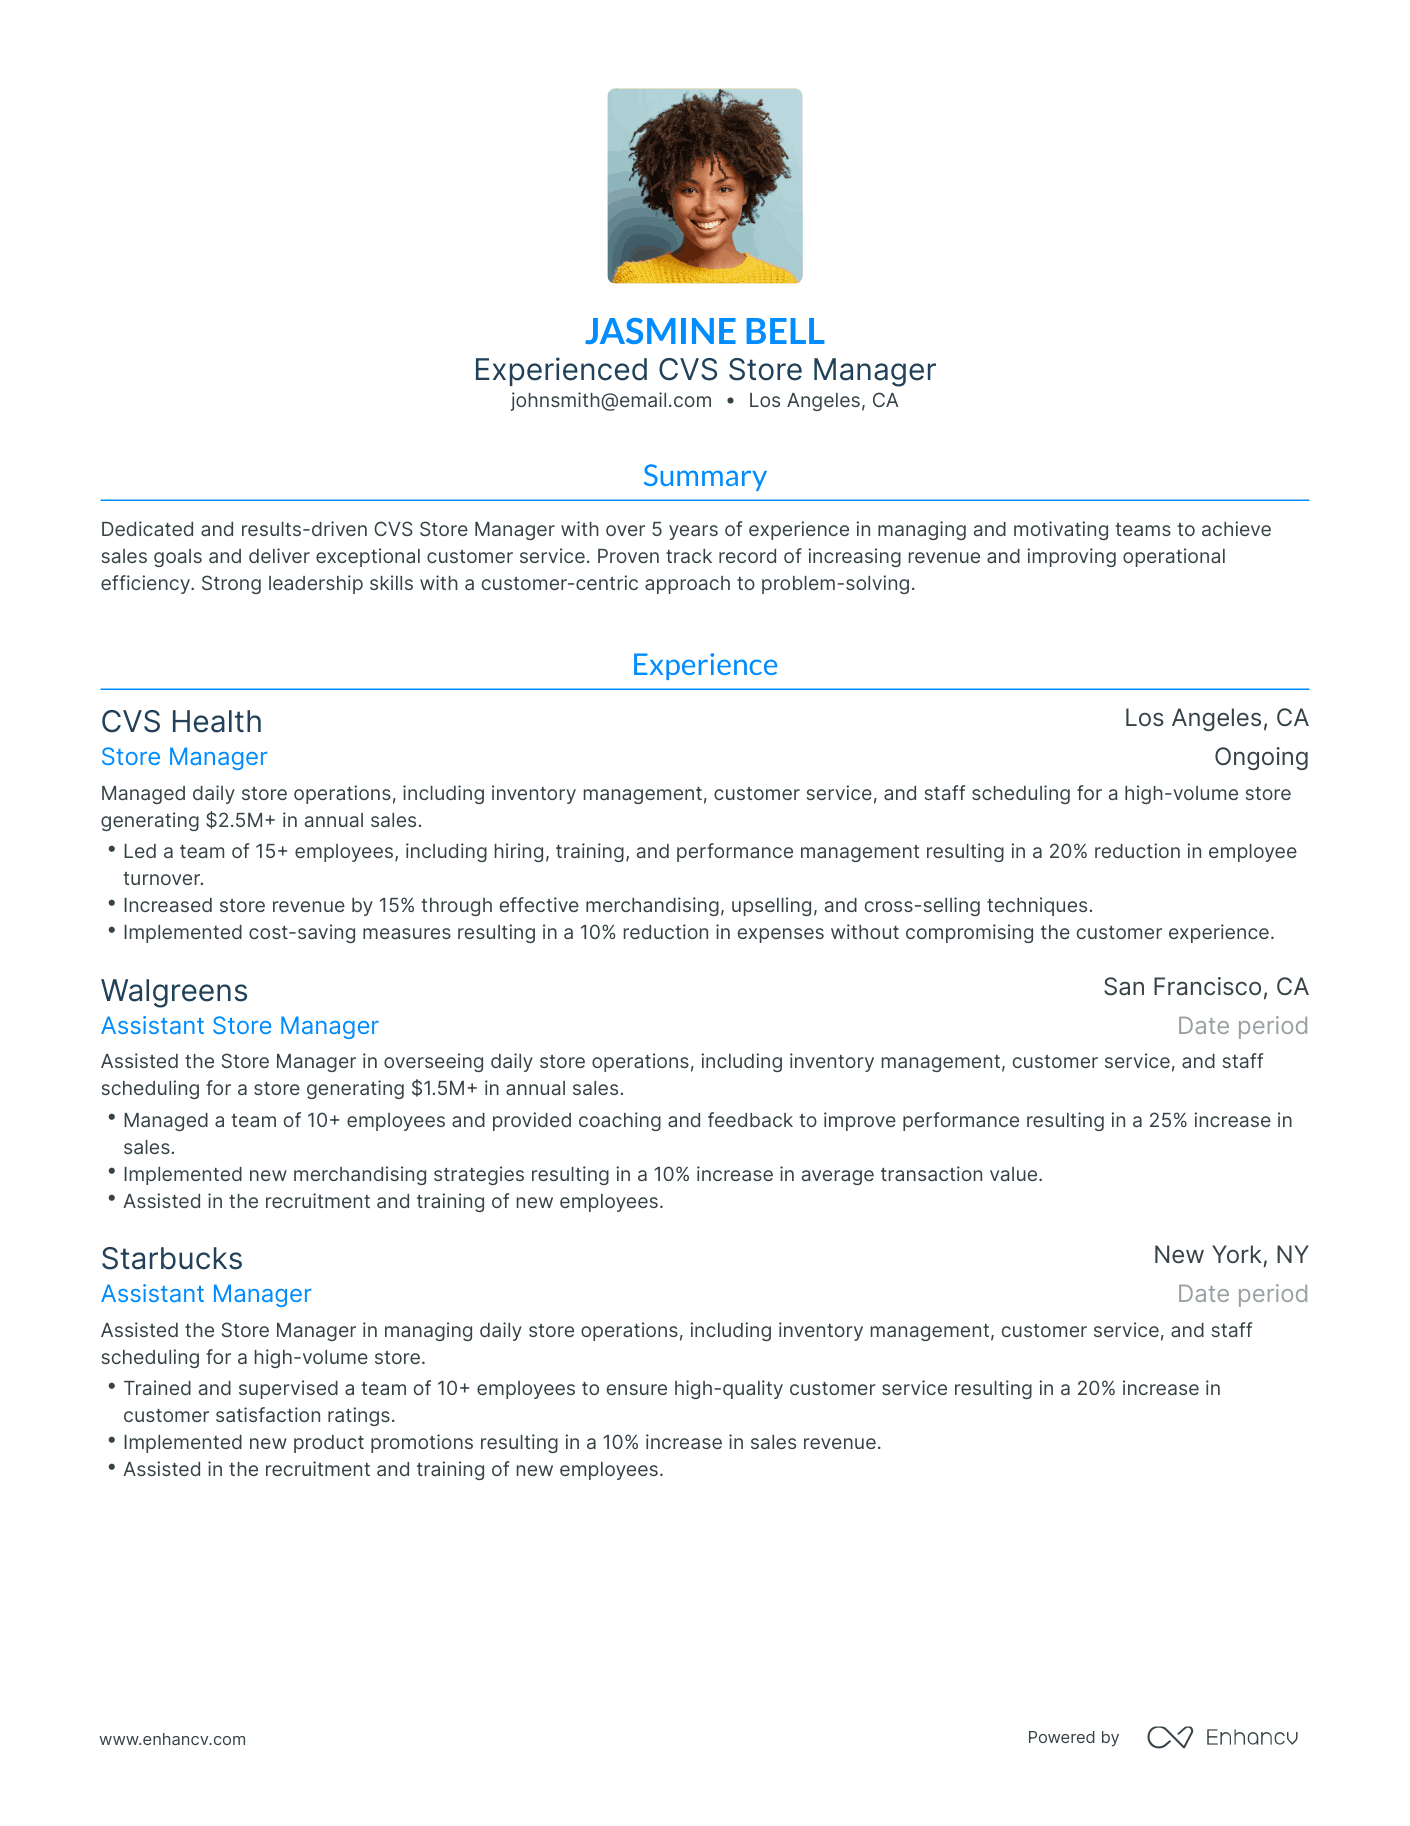 Traditional CVS Store Manager Resume Template